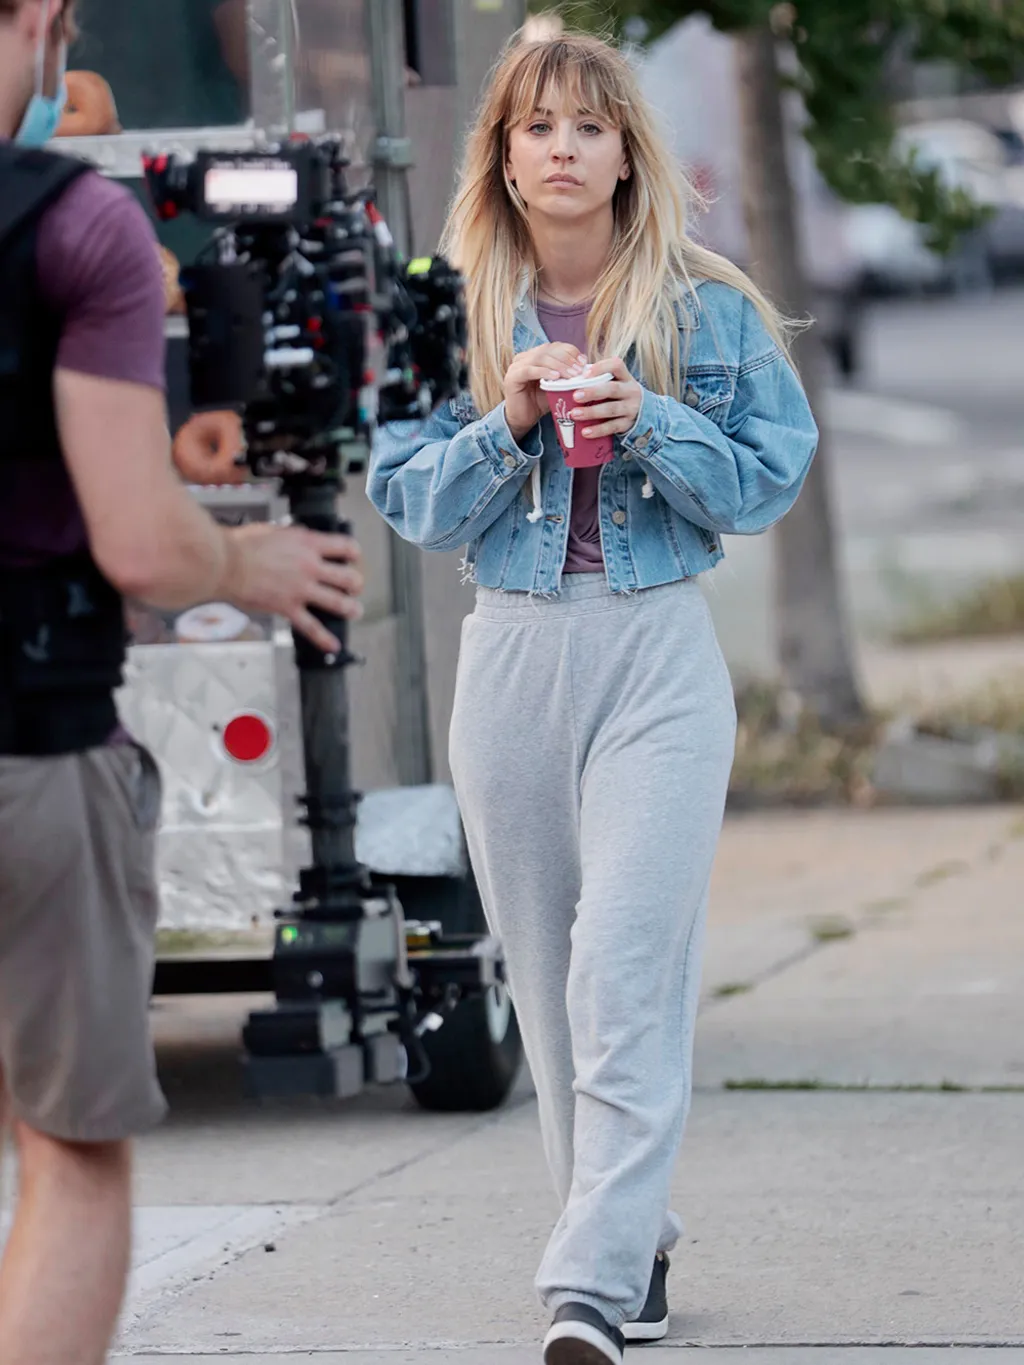 Kaley Cuoco films a scene where she gets hit by a car filming “Meet Cute” with Pete Davidson. Kaley Cuoco films a scene where she gets hit by a car filming “Meet Cute” with Pete Davidson. 12 Aug 2021 Pictured: Kaley Cuoco. Photo credit: SteveSands/NewYork